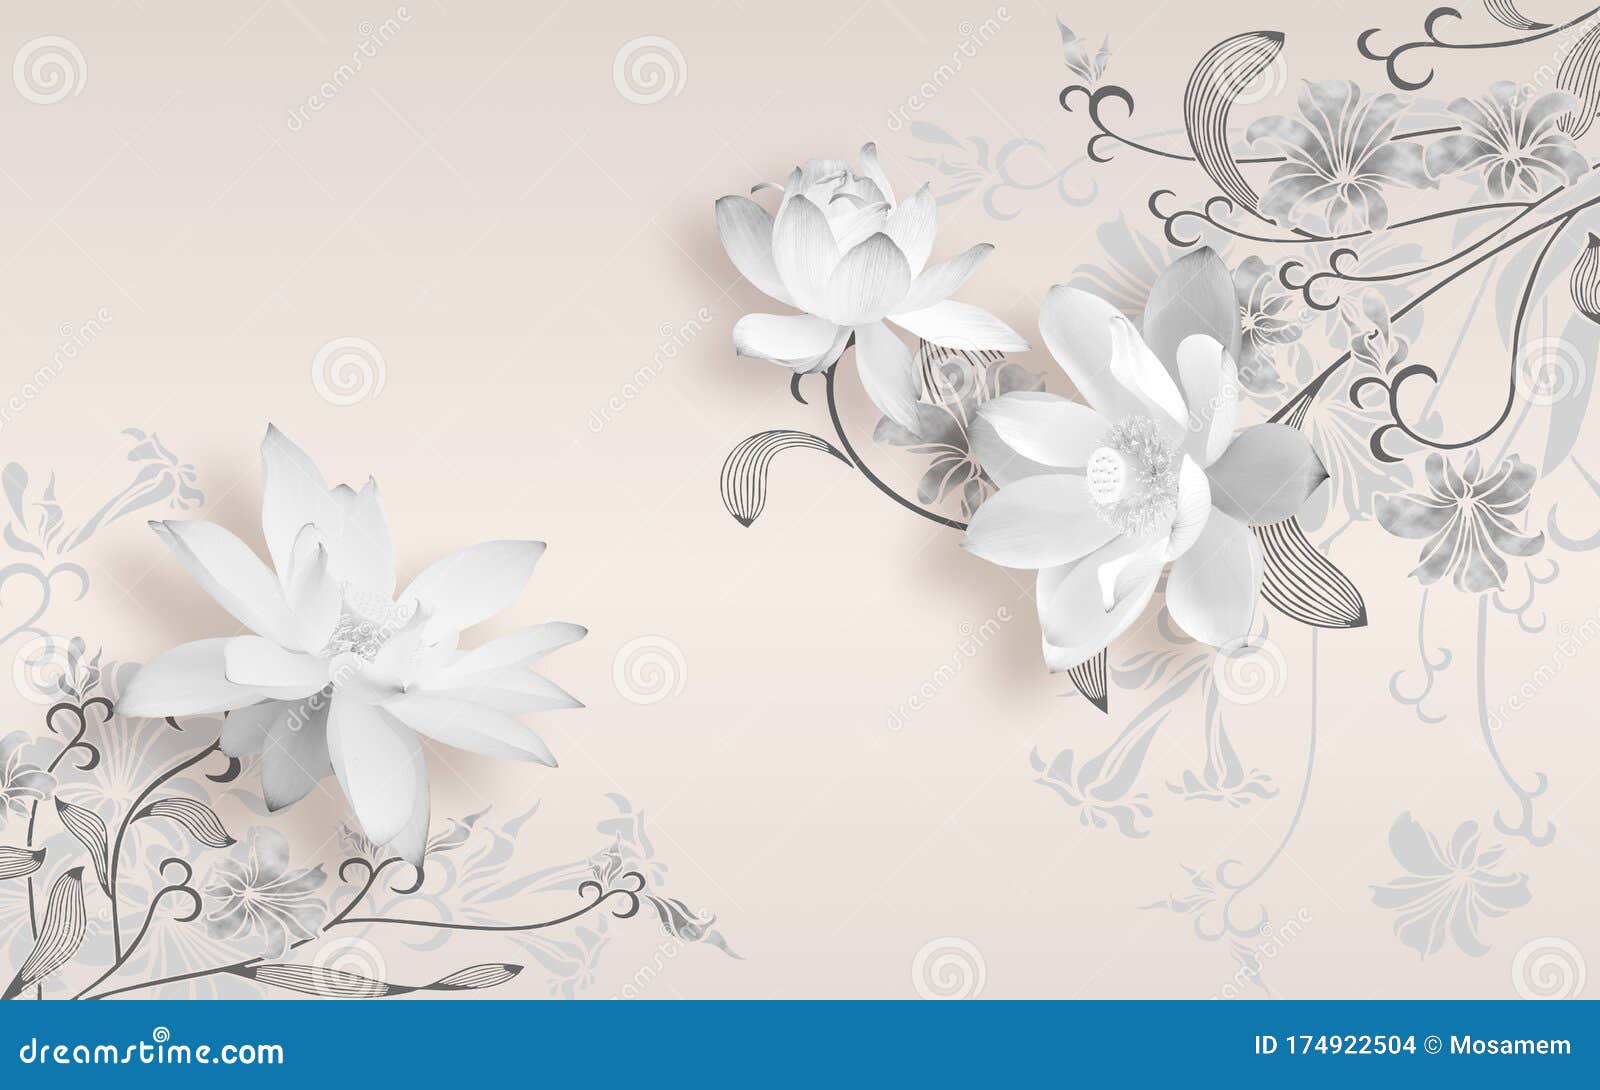 Details about   3D White Pearl Flower R538 Wallpaper Wall Mural Self-adhesive Commerce Kay